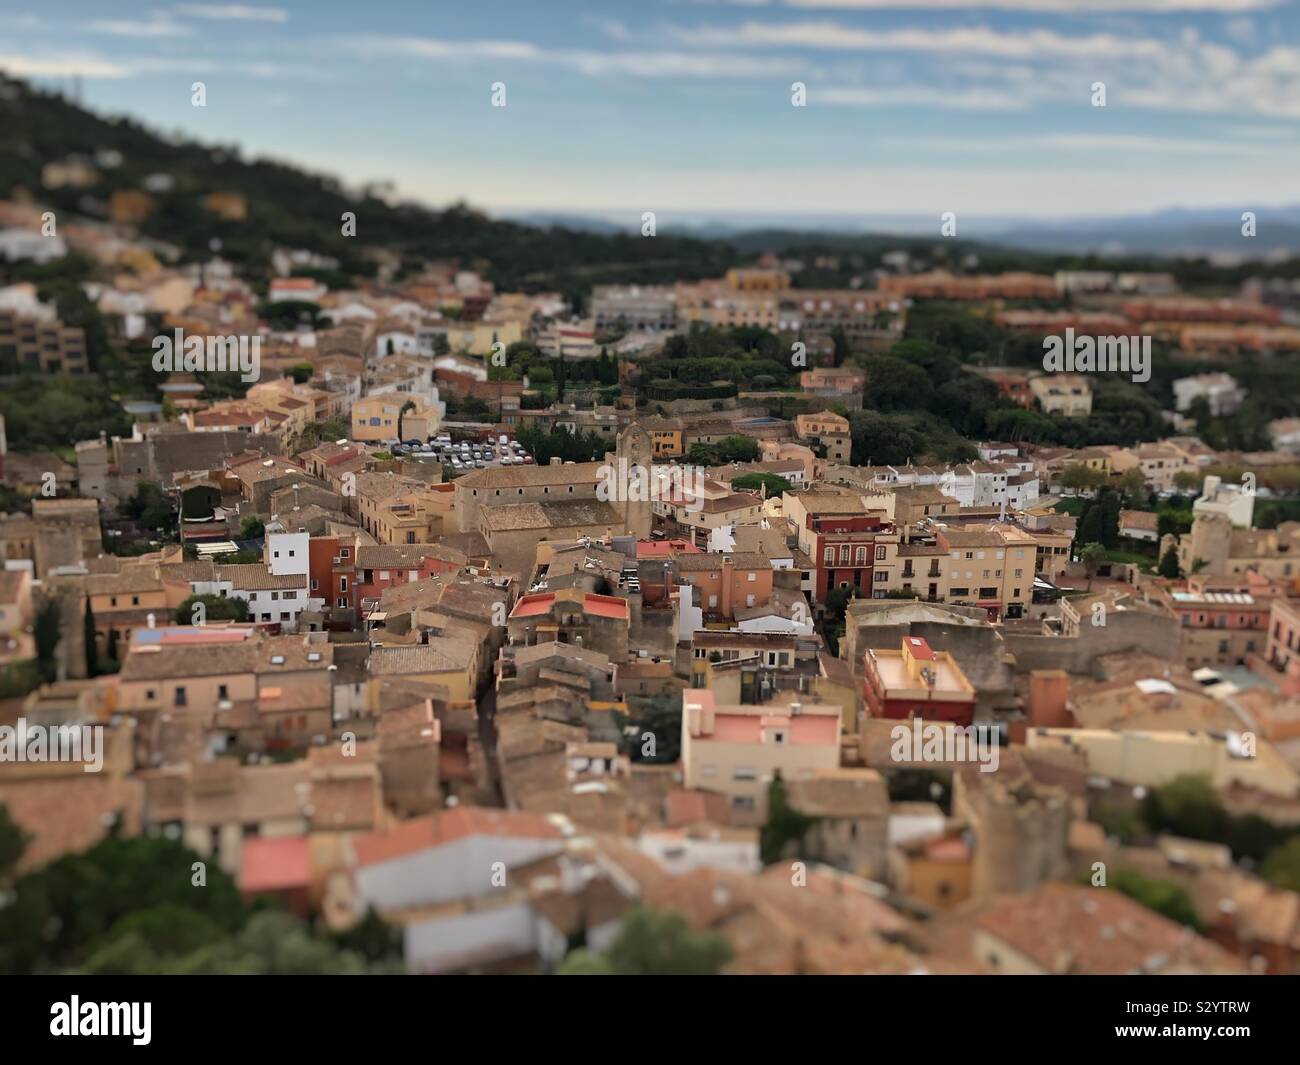 Views over the old Spanish town of Begur, Catalunya, from the castle ruins. Lens blur effect. Stock Photo